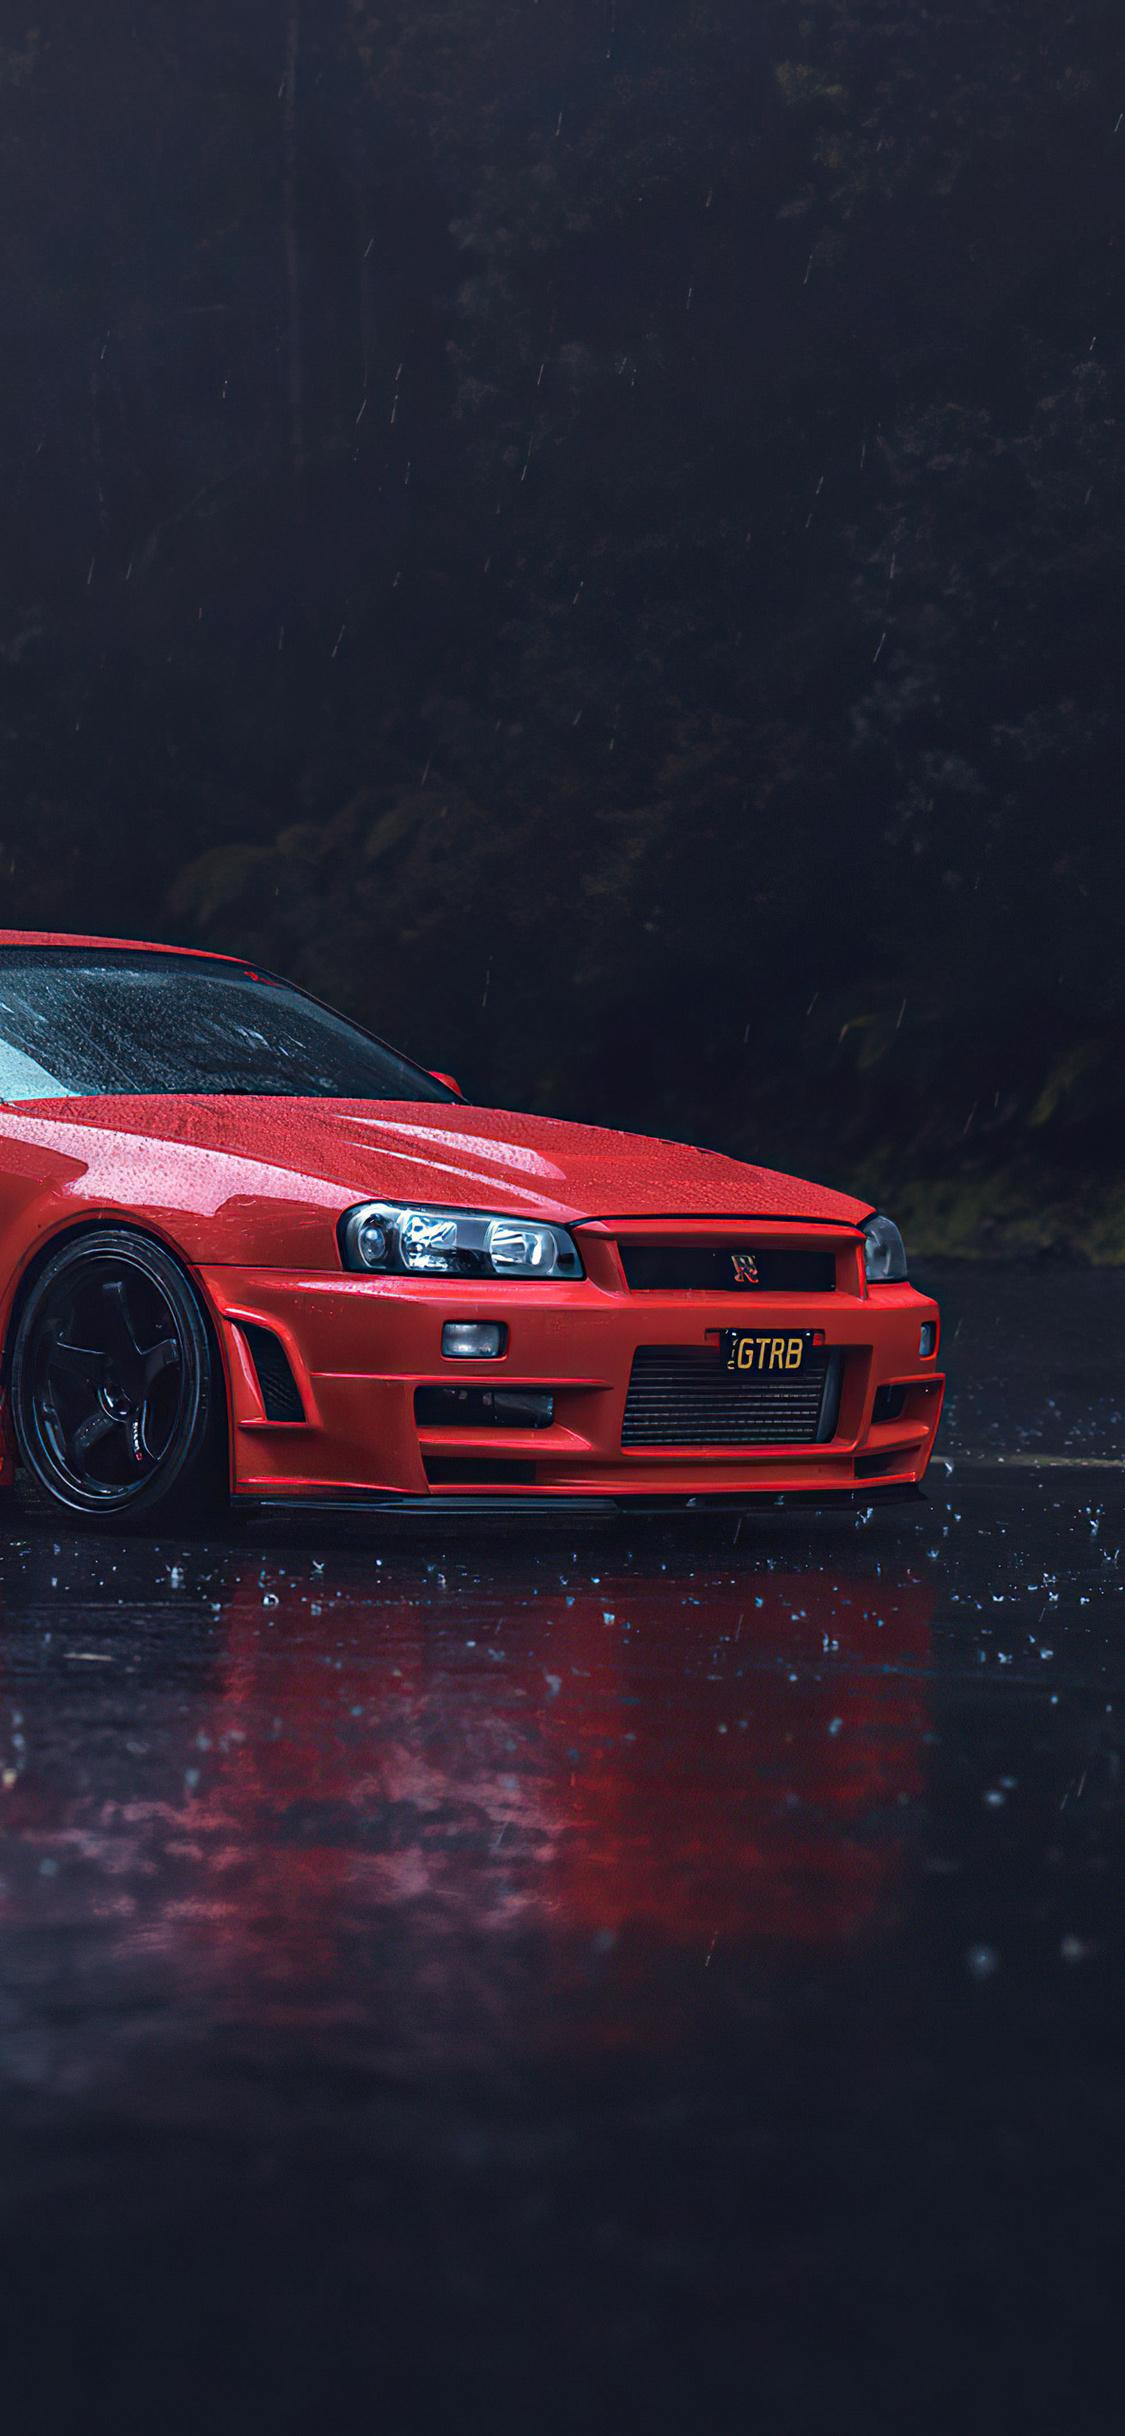 Red Nissan Skyline Wallpapers Top Free Red Nissan Skyline Backgrounds Wallpaperaccess